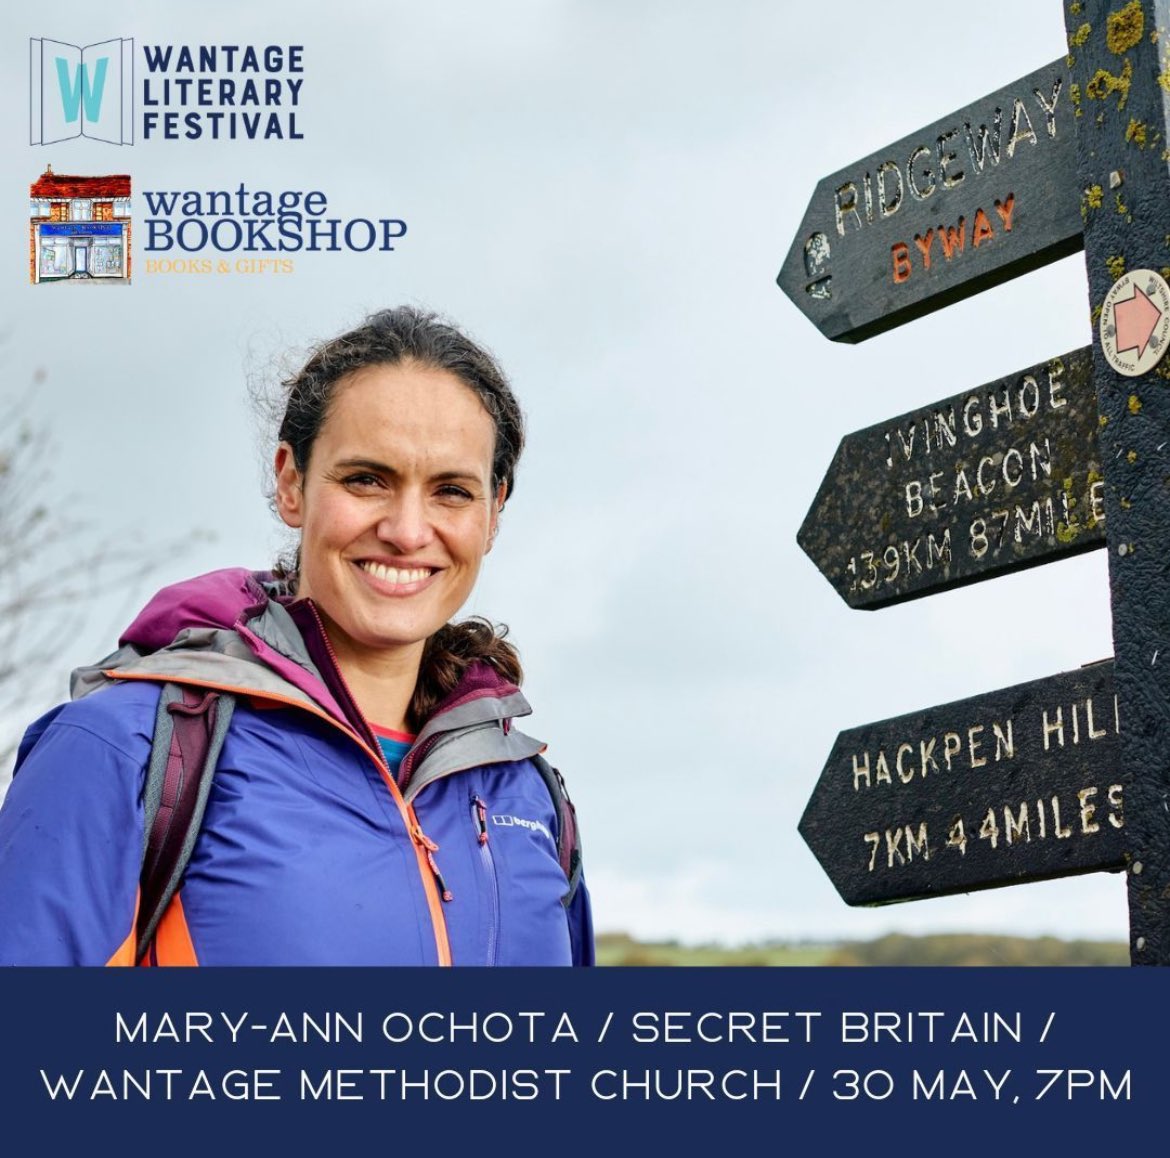 Our sister bookshop @WantageBookshop is delighted to co-host this event with @wantagelitfest . Don’t miss @MaryAnnOchota on May 30th - a fascinating look at our landscape and ancestors #SecretBritain 
mailchi.mp/25564d8cfc76/n…